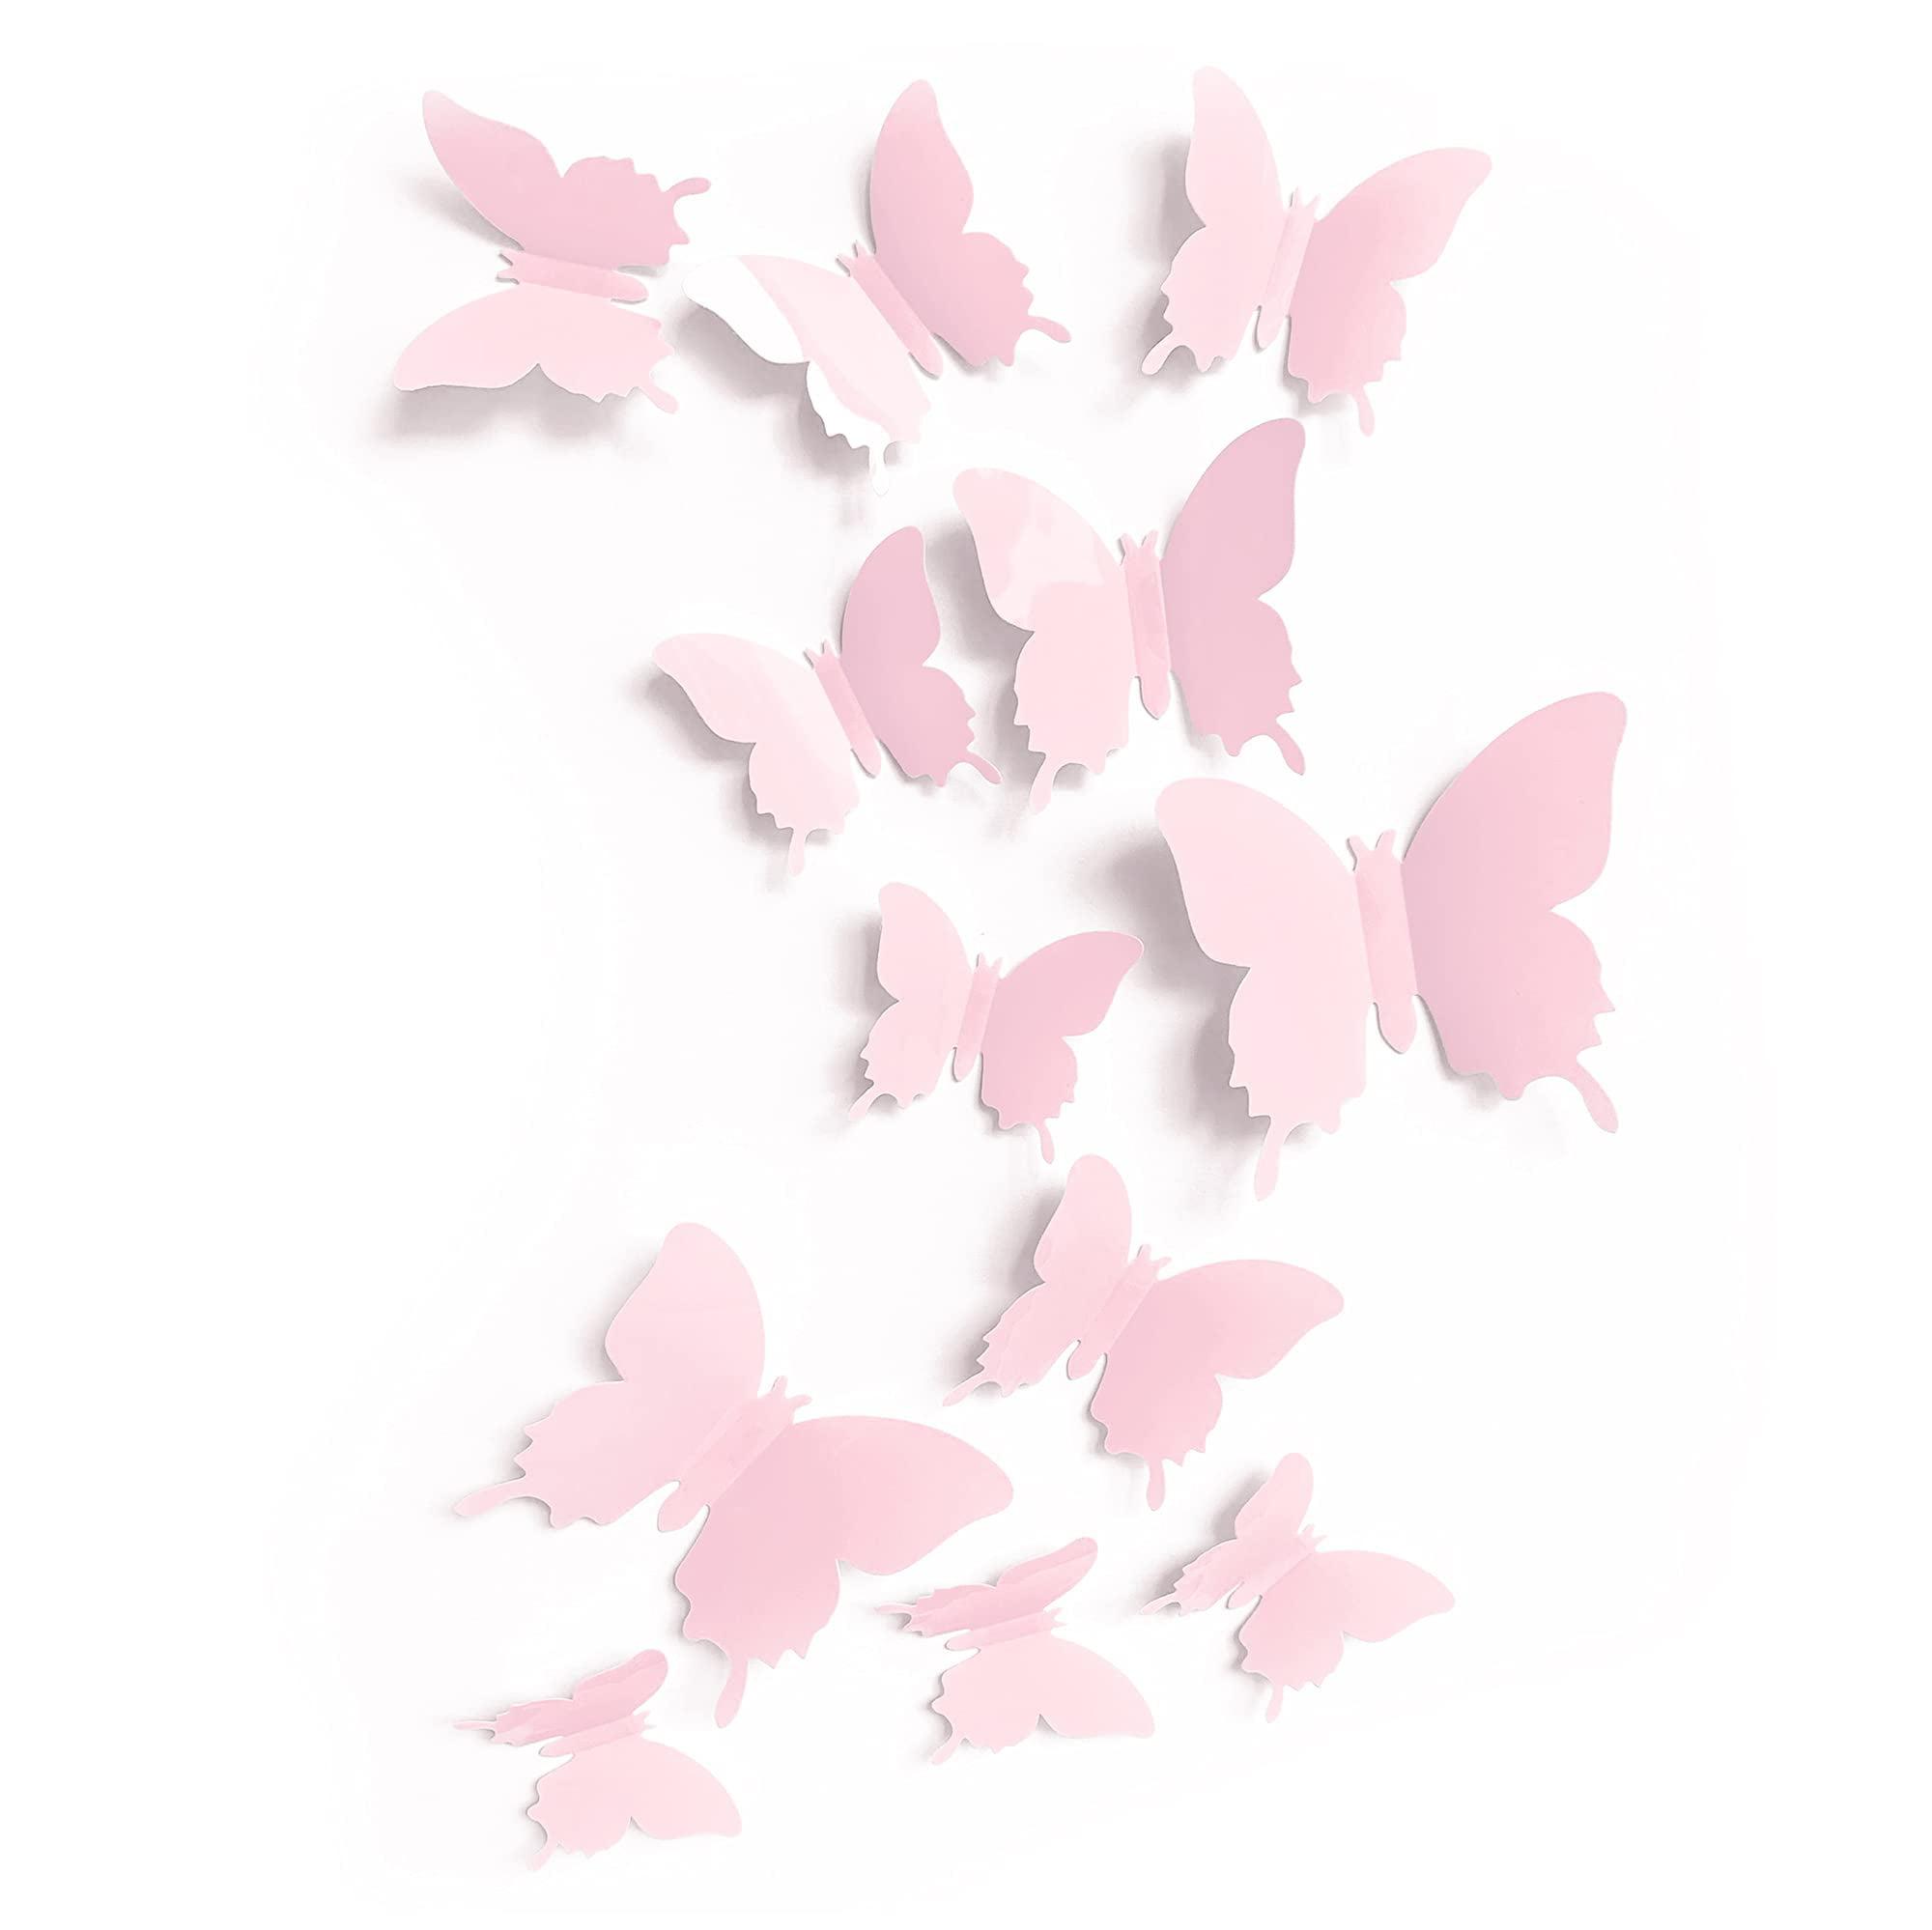 Cute Pink Butterfly Wall Decor Pcs Girls Room Decals